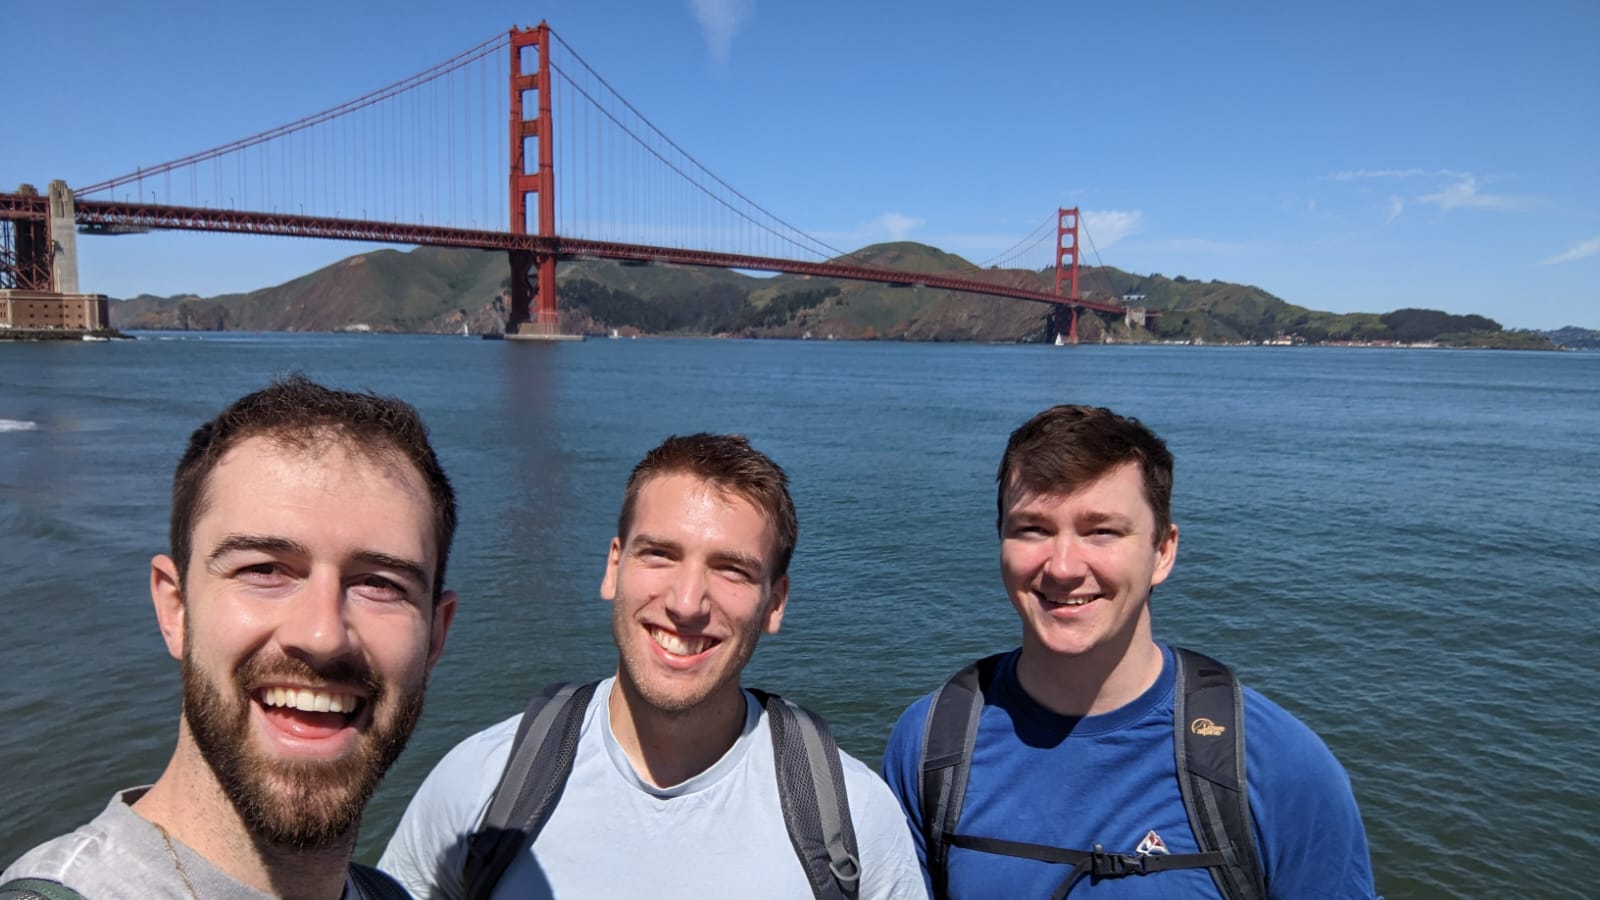 Max, Thom and I being tourists